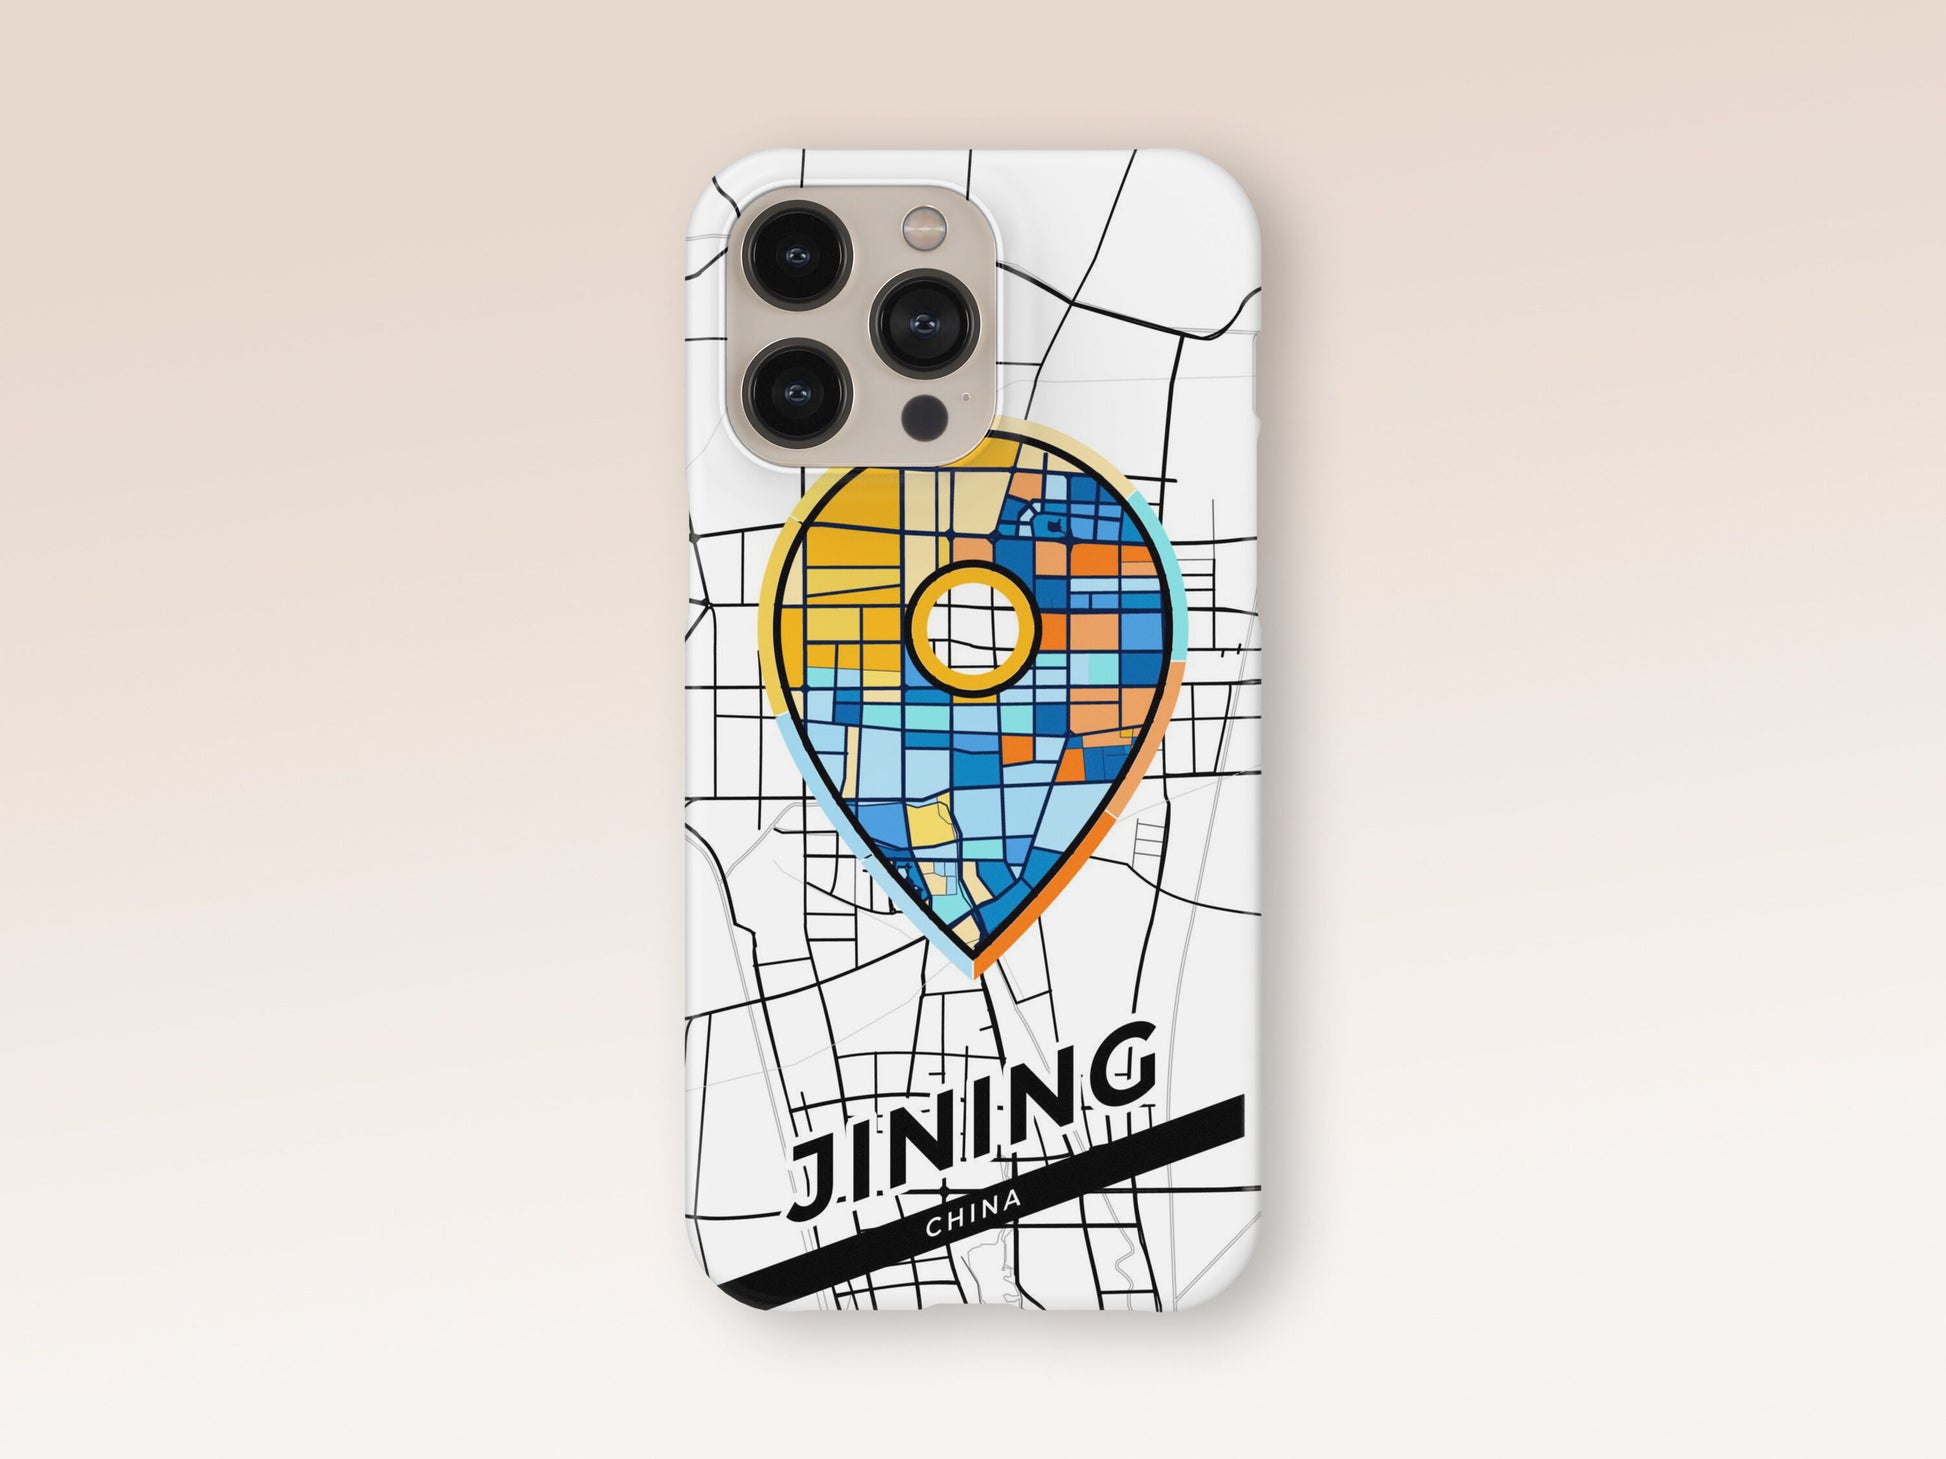 Jining China slim phone case with colorful icon. Birthday, wedding or housewarming gift. Couple match cases. 1